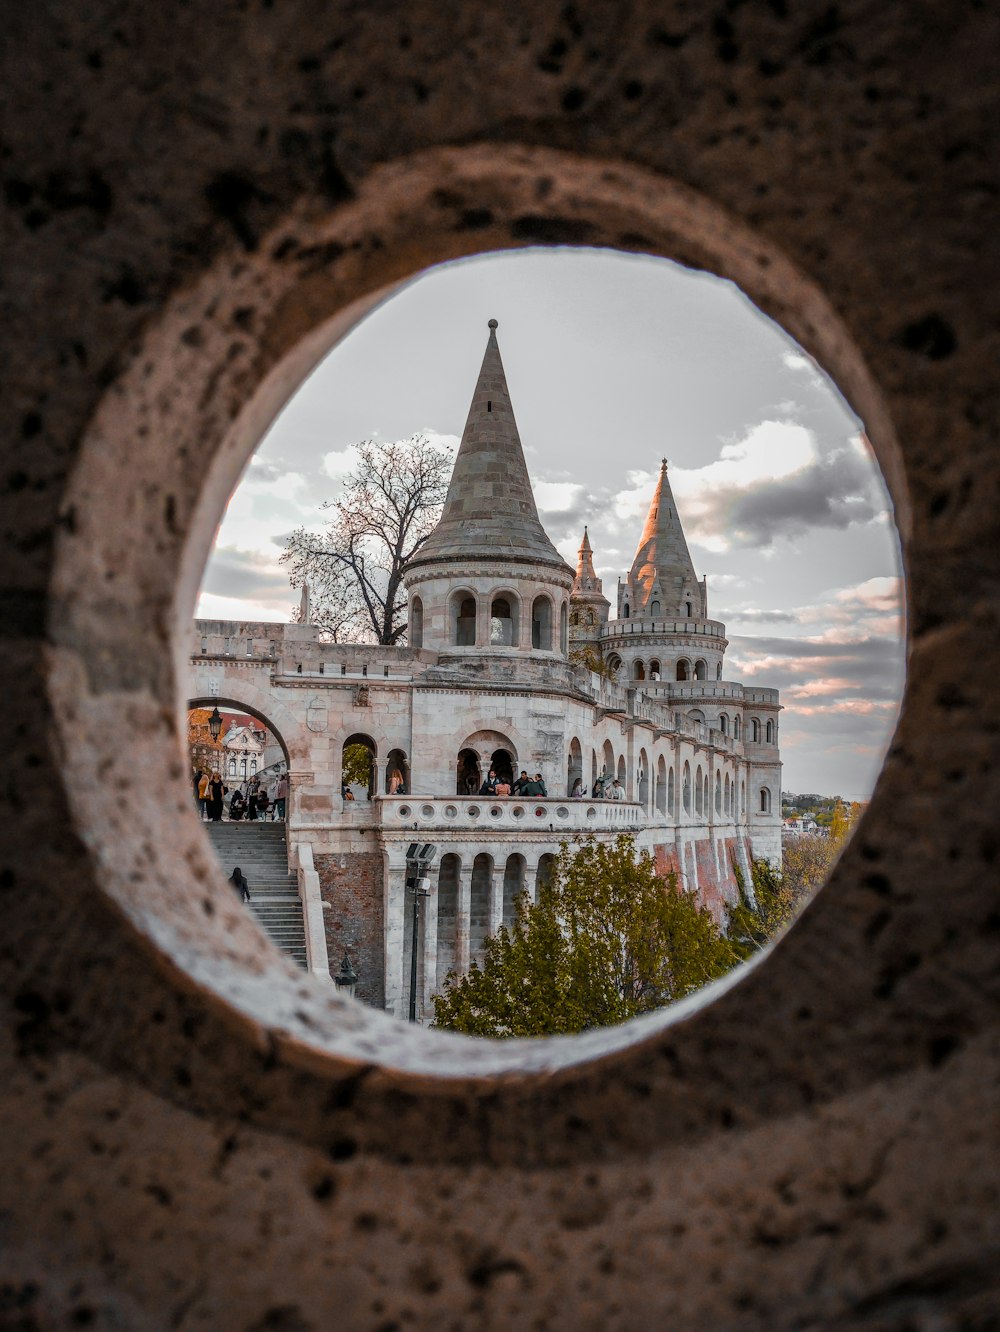 a view of a castle through a hole in a wall